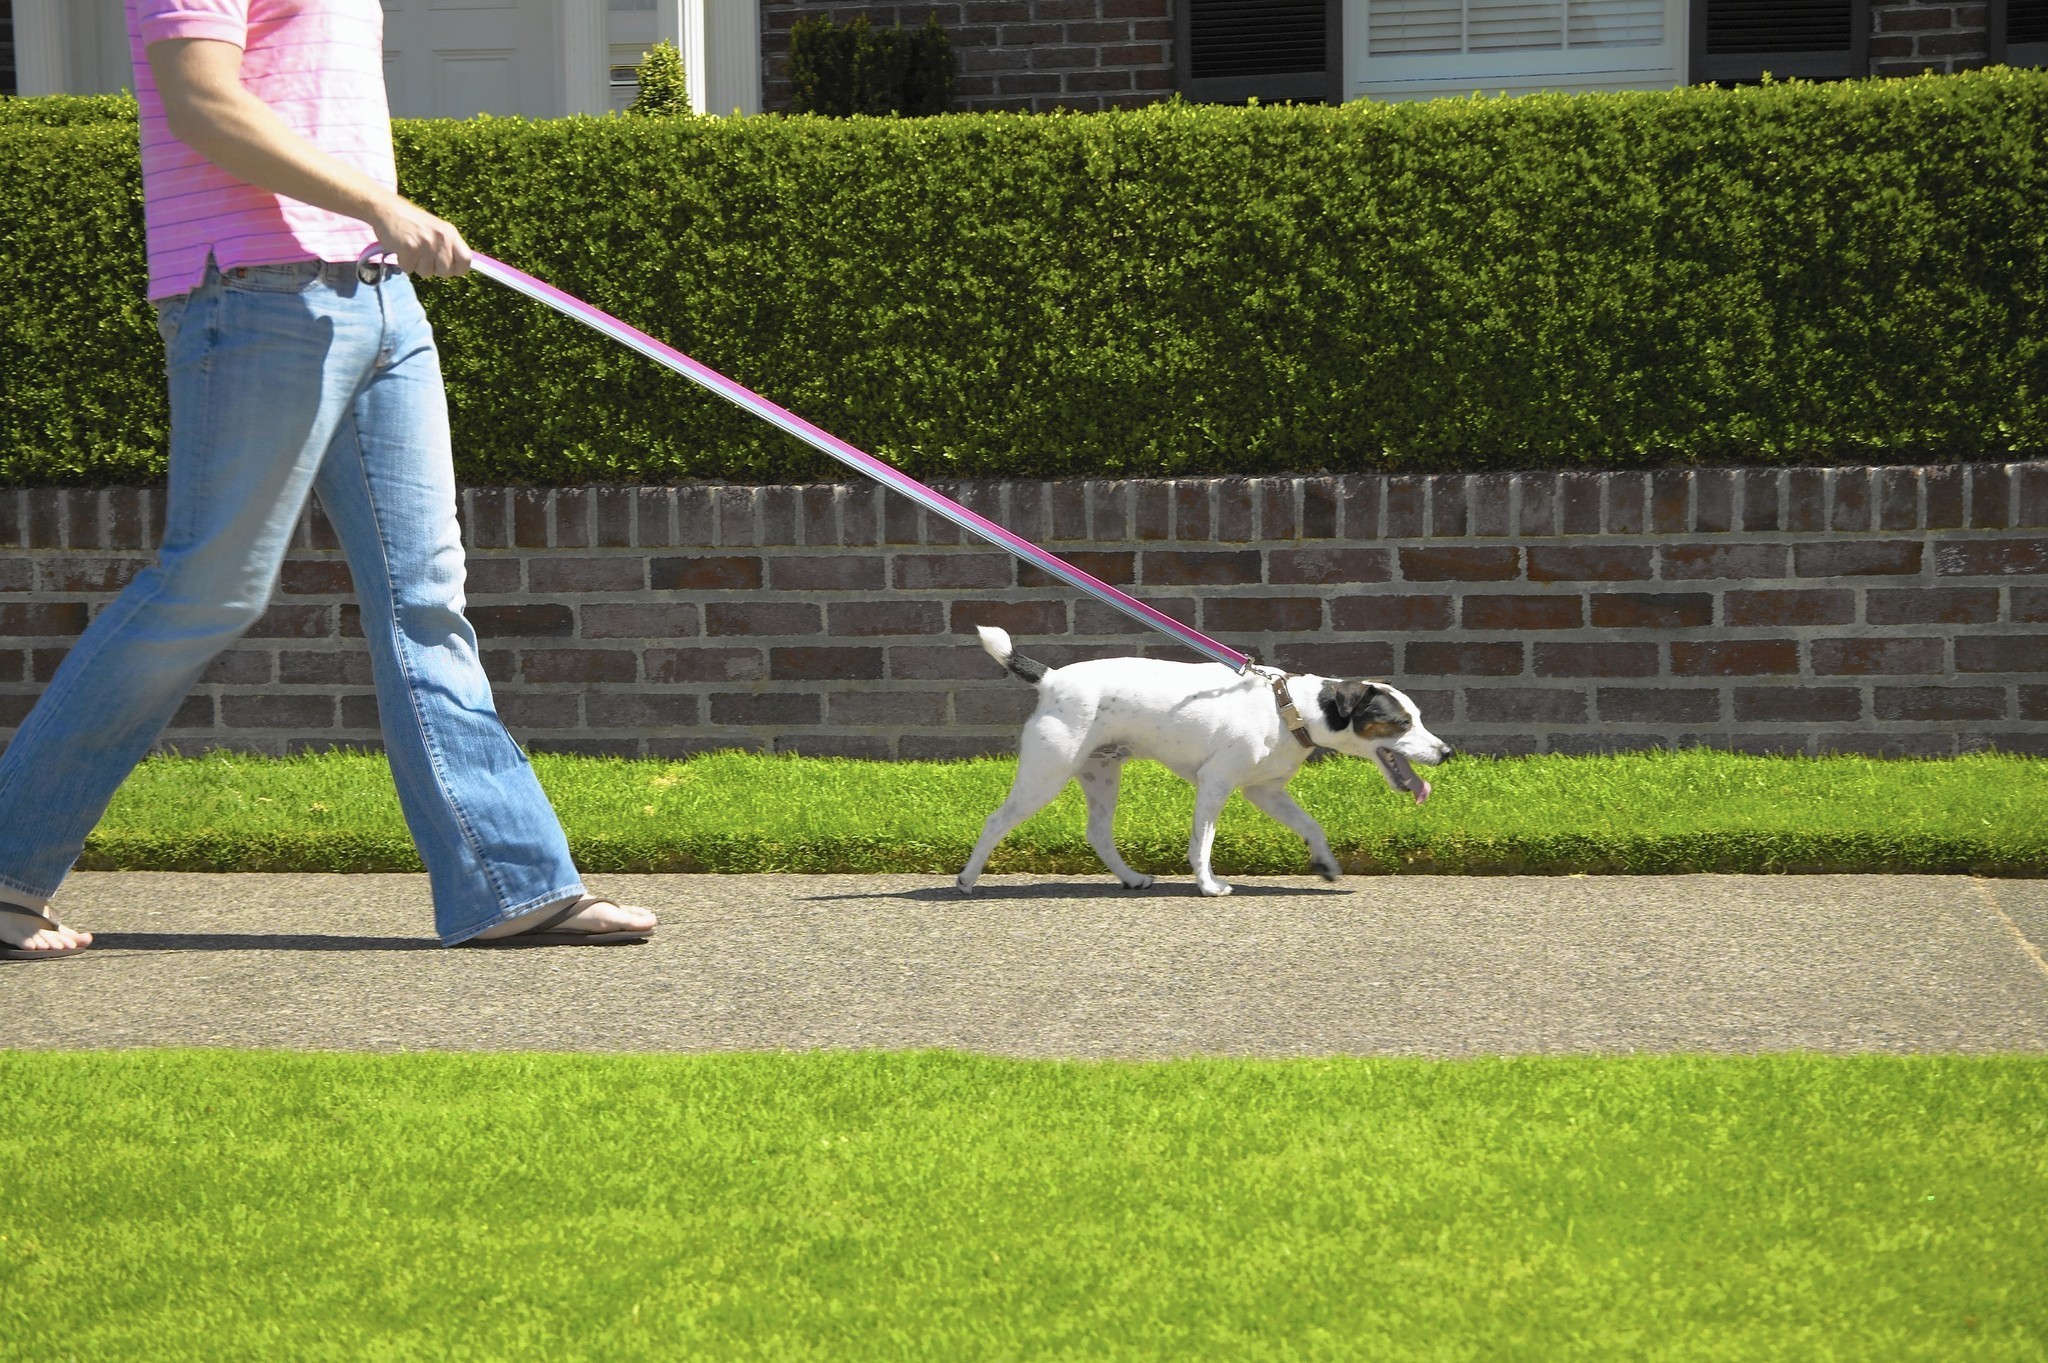 Dog walking seniors are healthier but think hard before buying